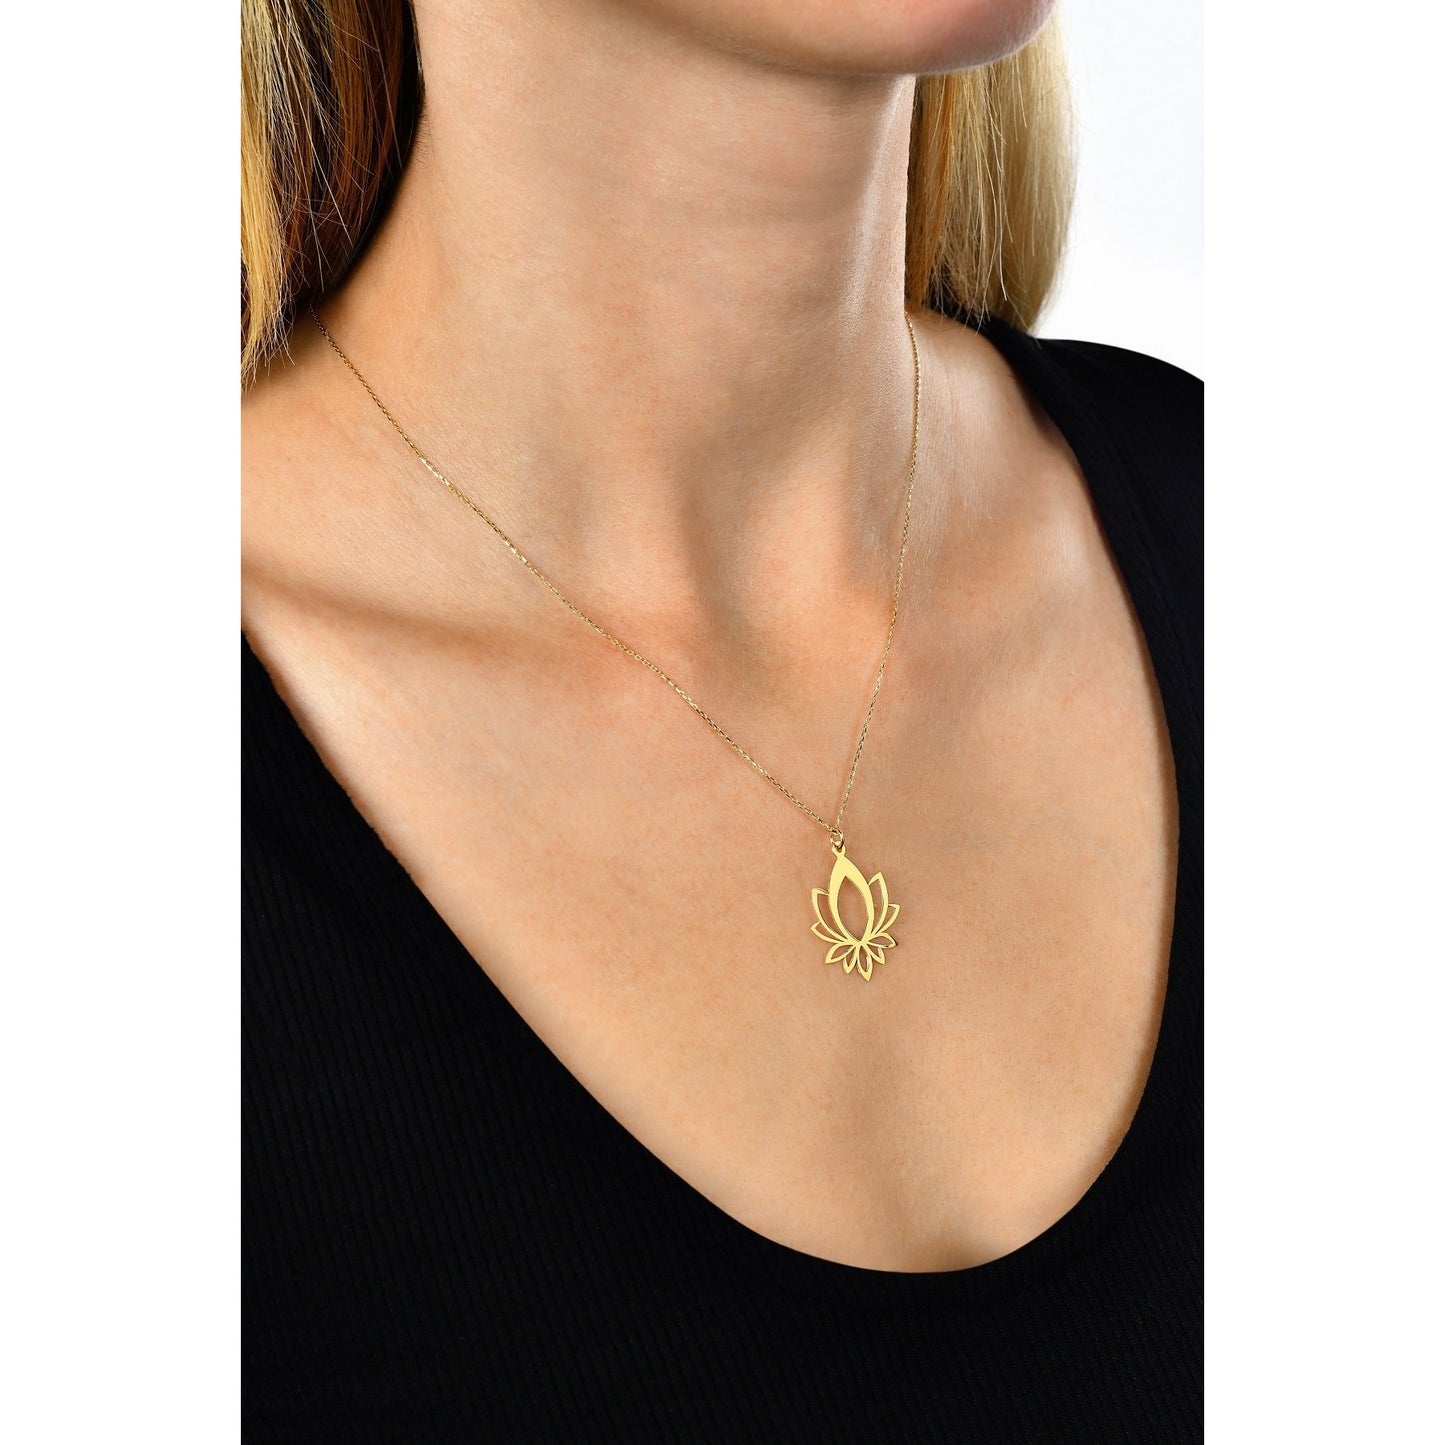 Special Design Gift 14k Gold Lotus Necklace 